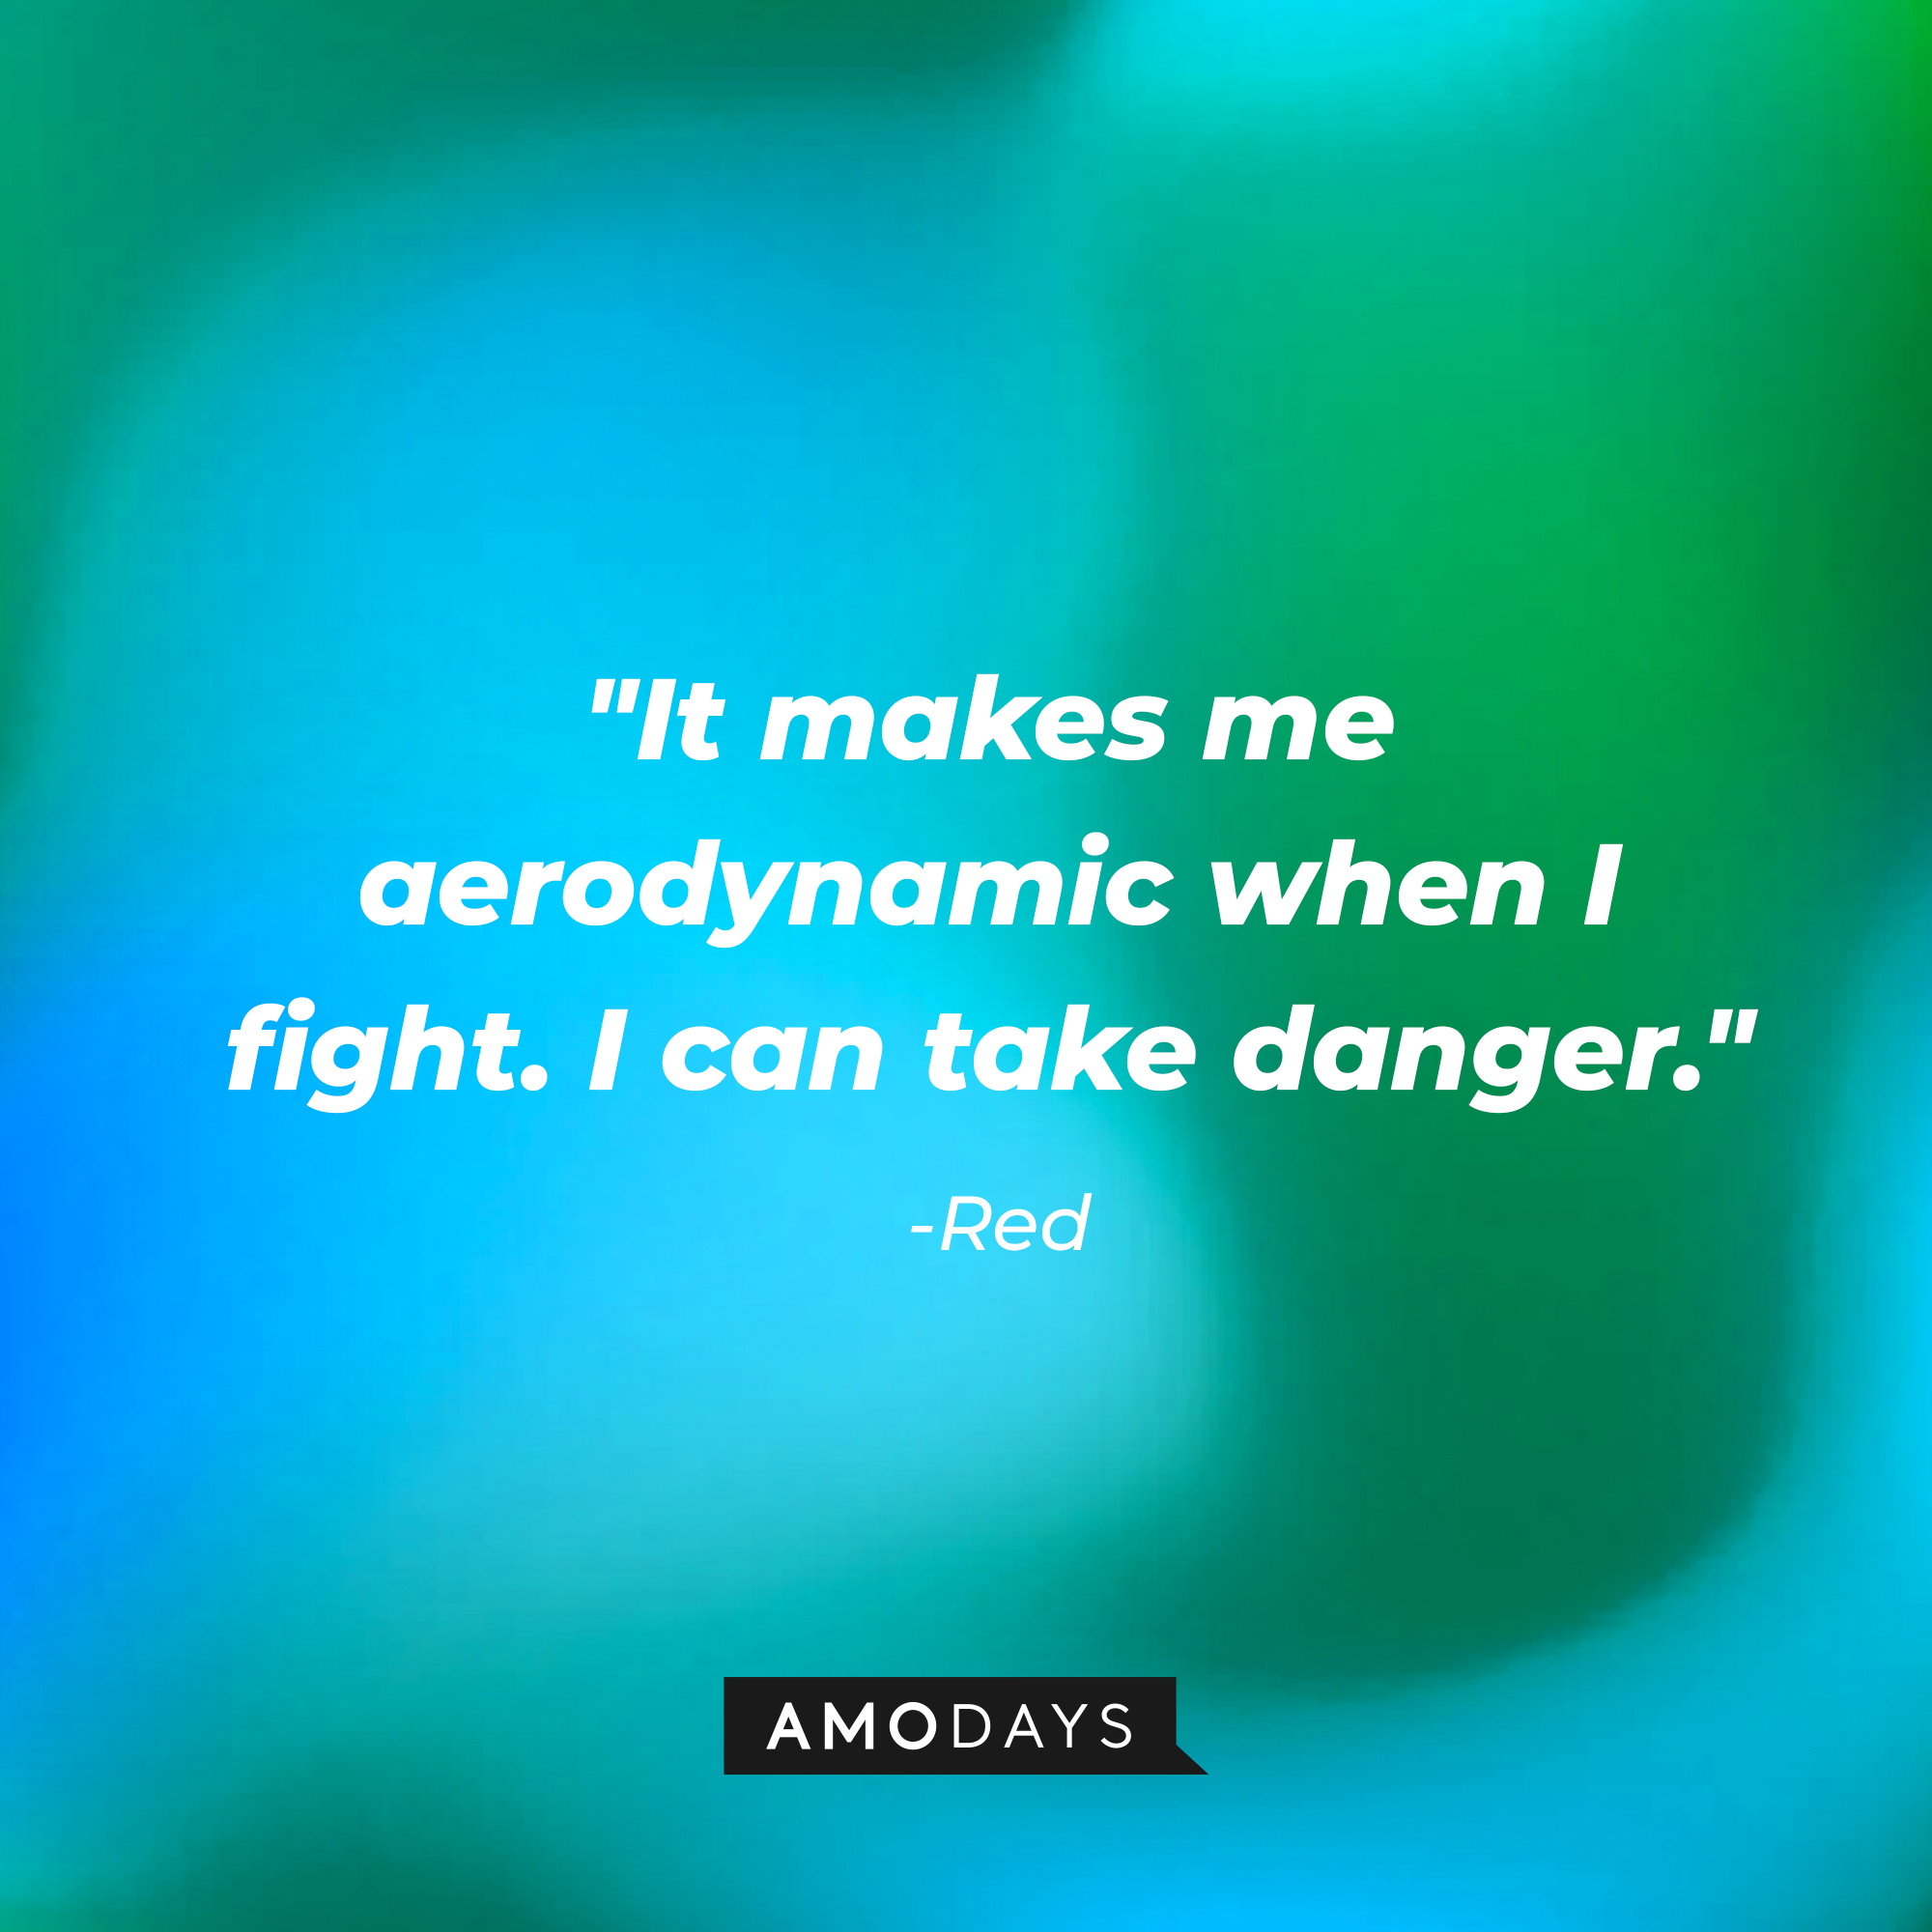 Red's quote: "It makes me aerodynamic when I fight. I can take danger." | Source: AmoDays